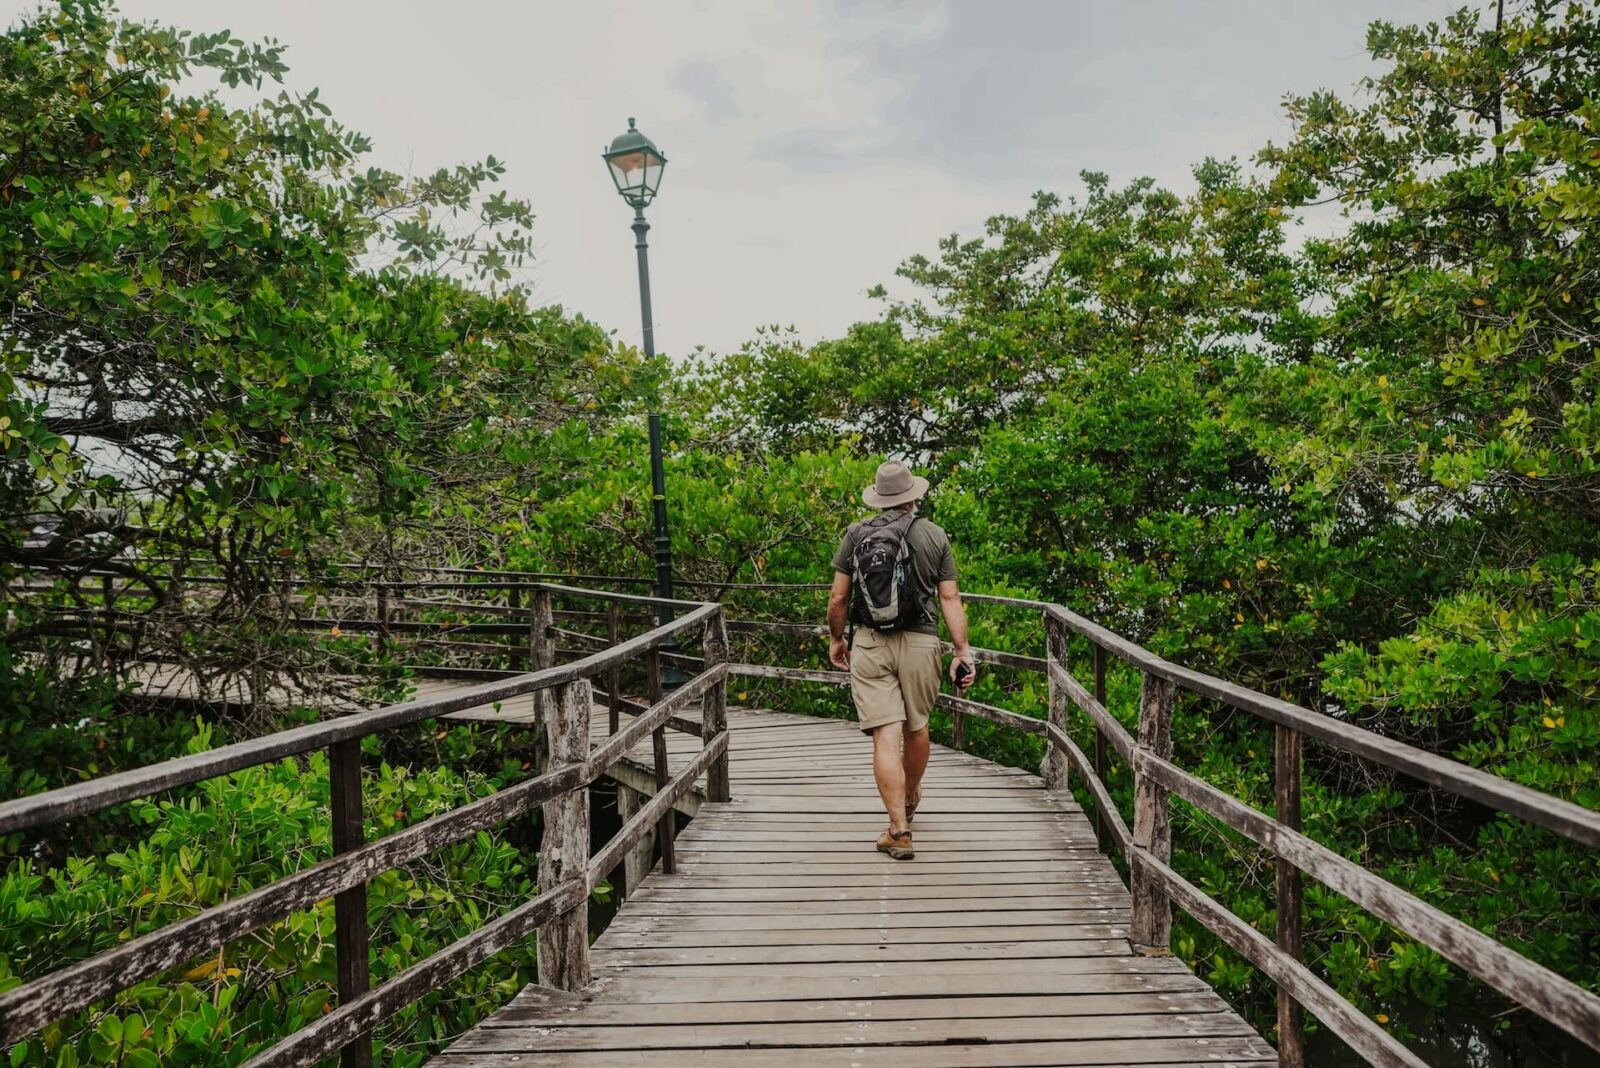 A person walking on a wooden bridge through a green forest.